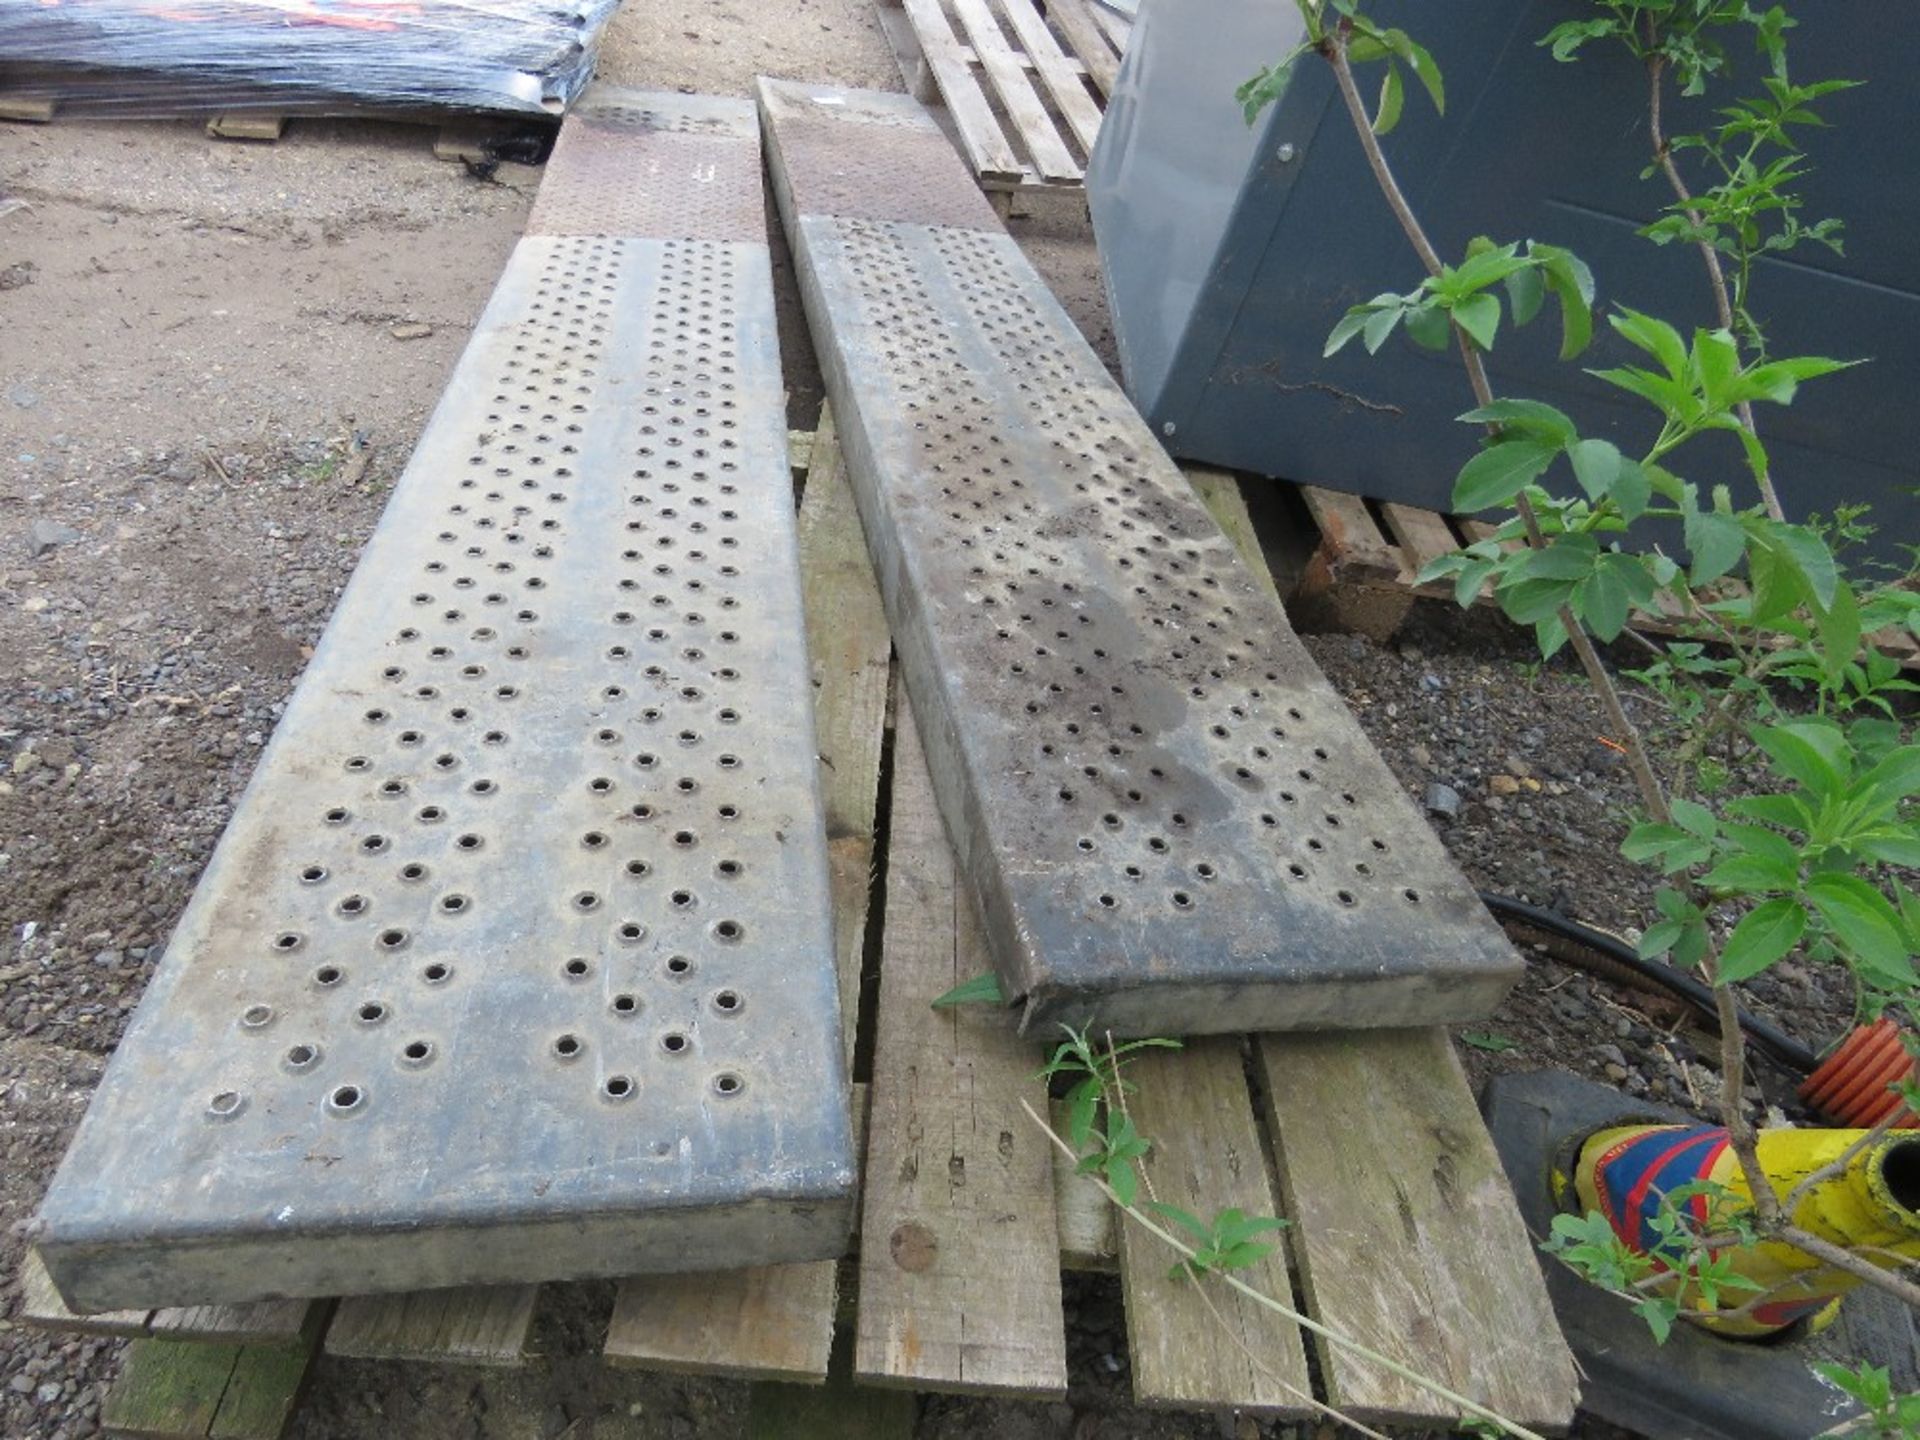 PAIR OF STEEL LOADING RAMPS 8FT LENGTH APPROX. - Image 7 of 7